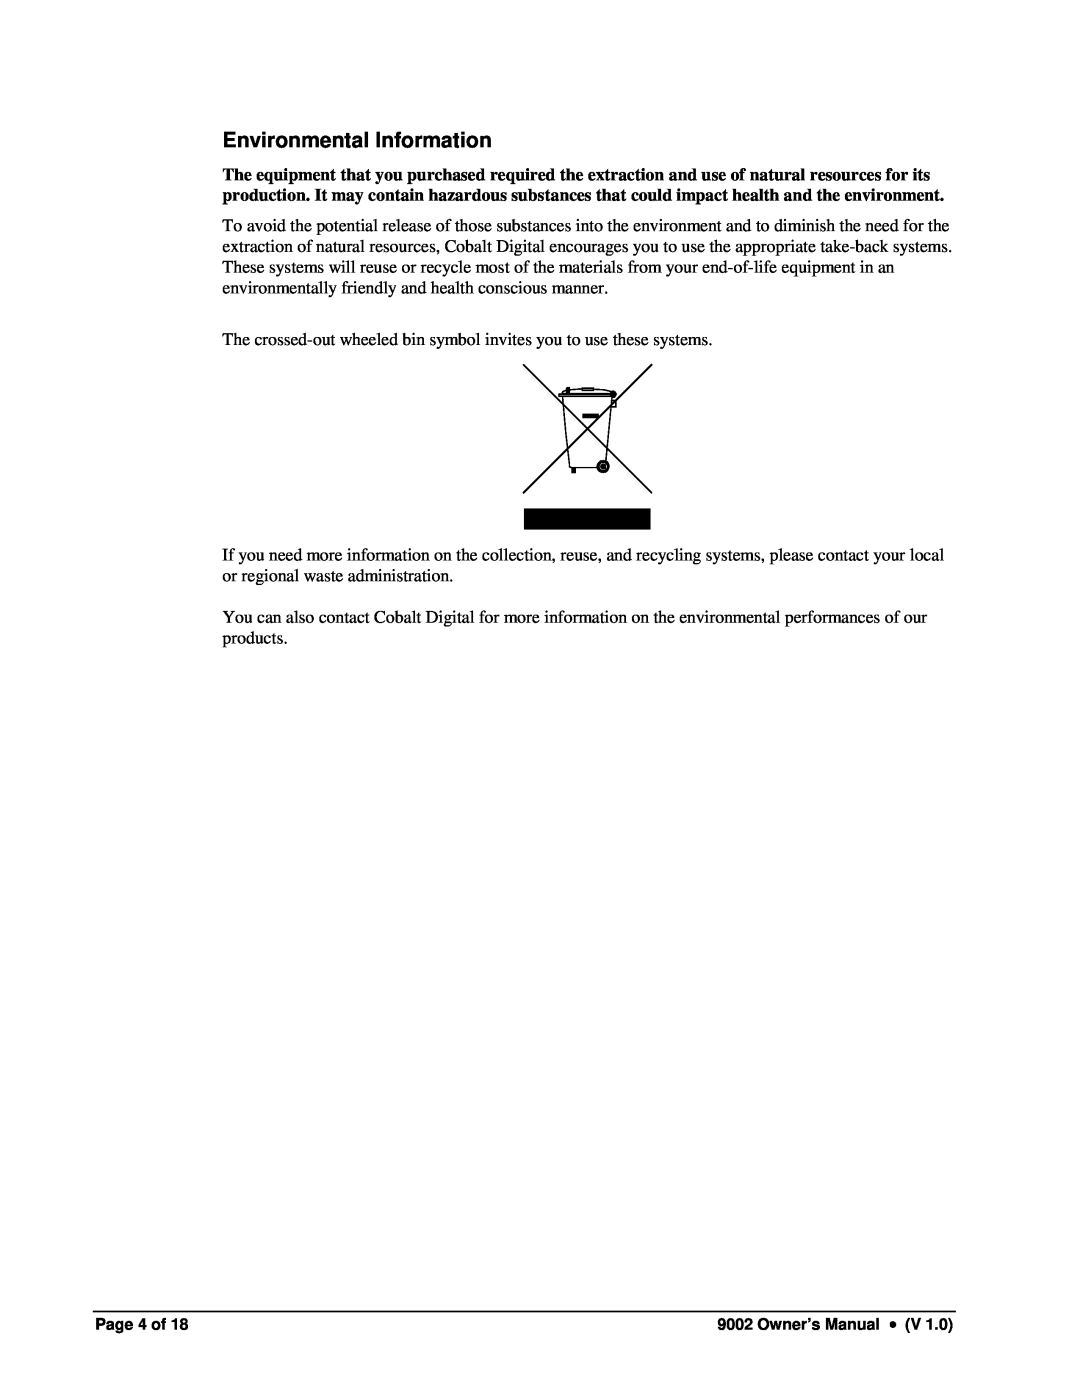 Cobalt Networks 9002 owner manual Environmental Information, Page 4 of 